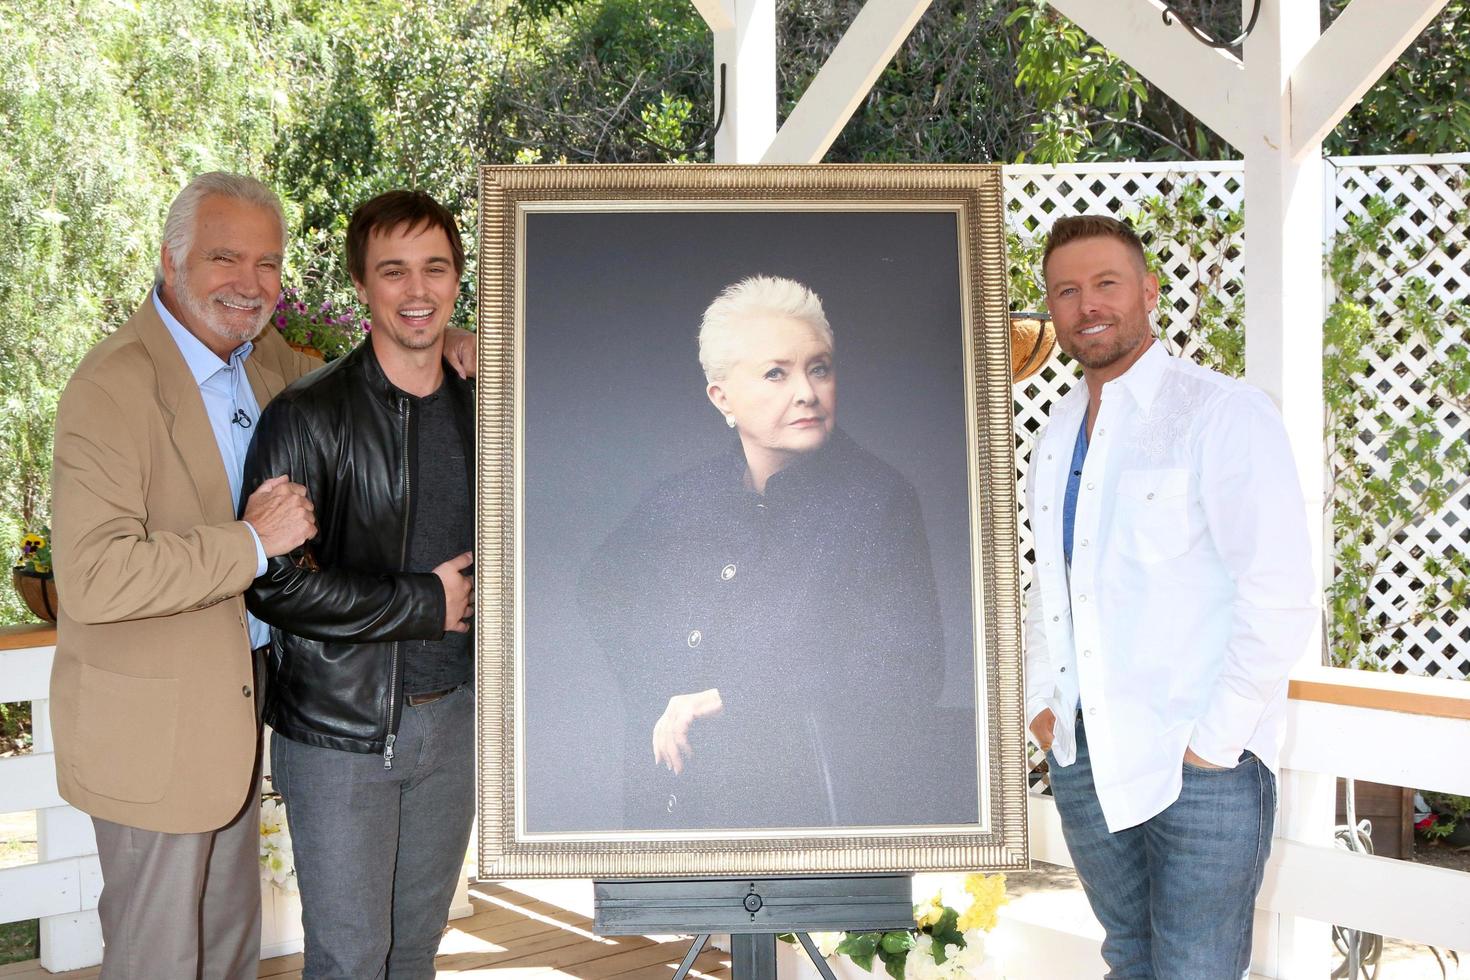 los angeles 14. april - john mccook, darin brooks, susan flannery portrait, jacob young at the home and family feiert am 14. april 2017 in los angeles, ca foto